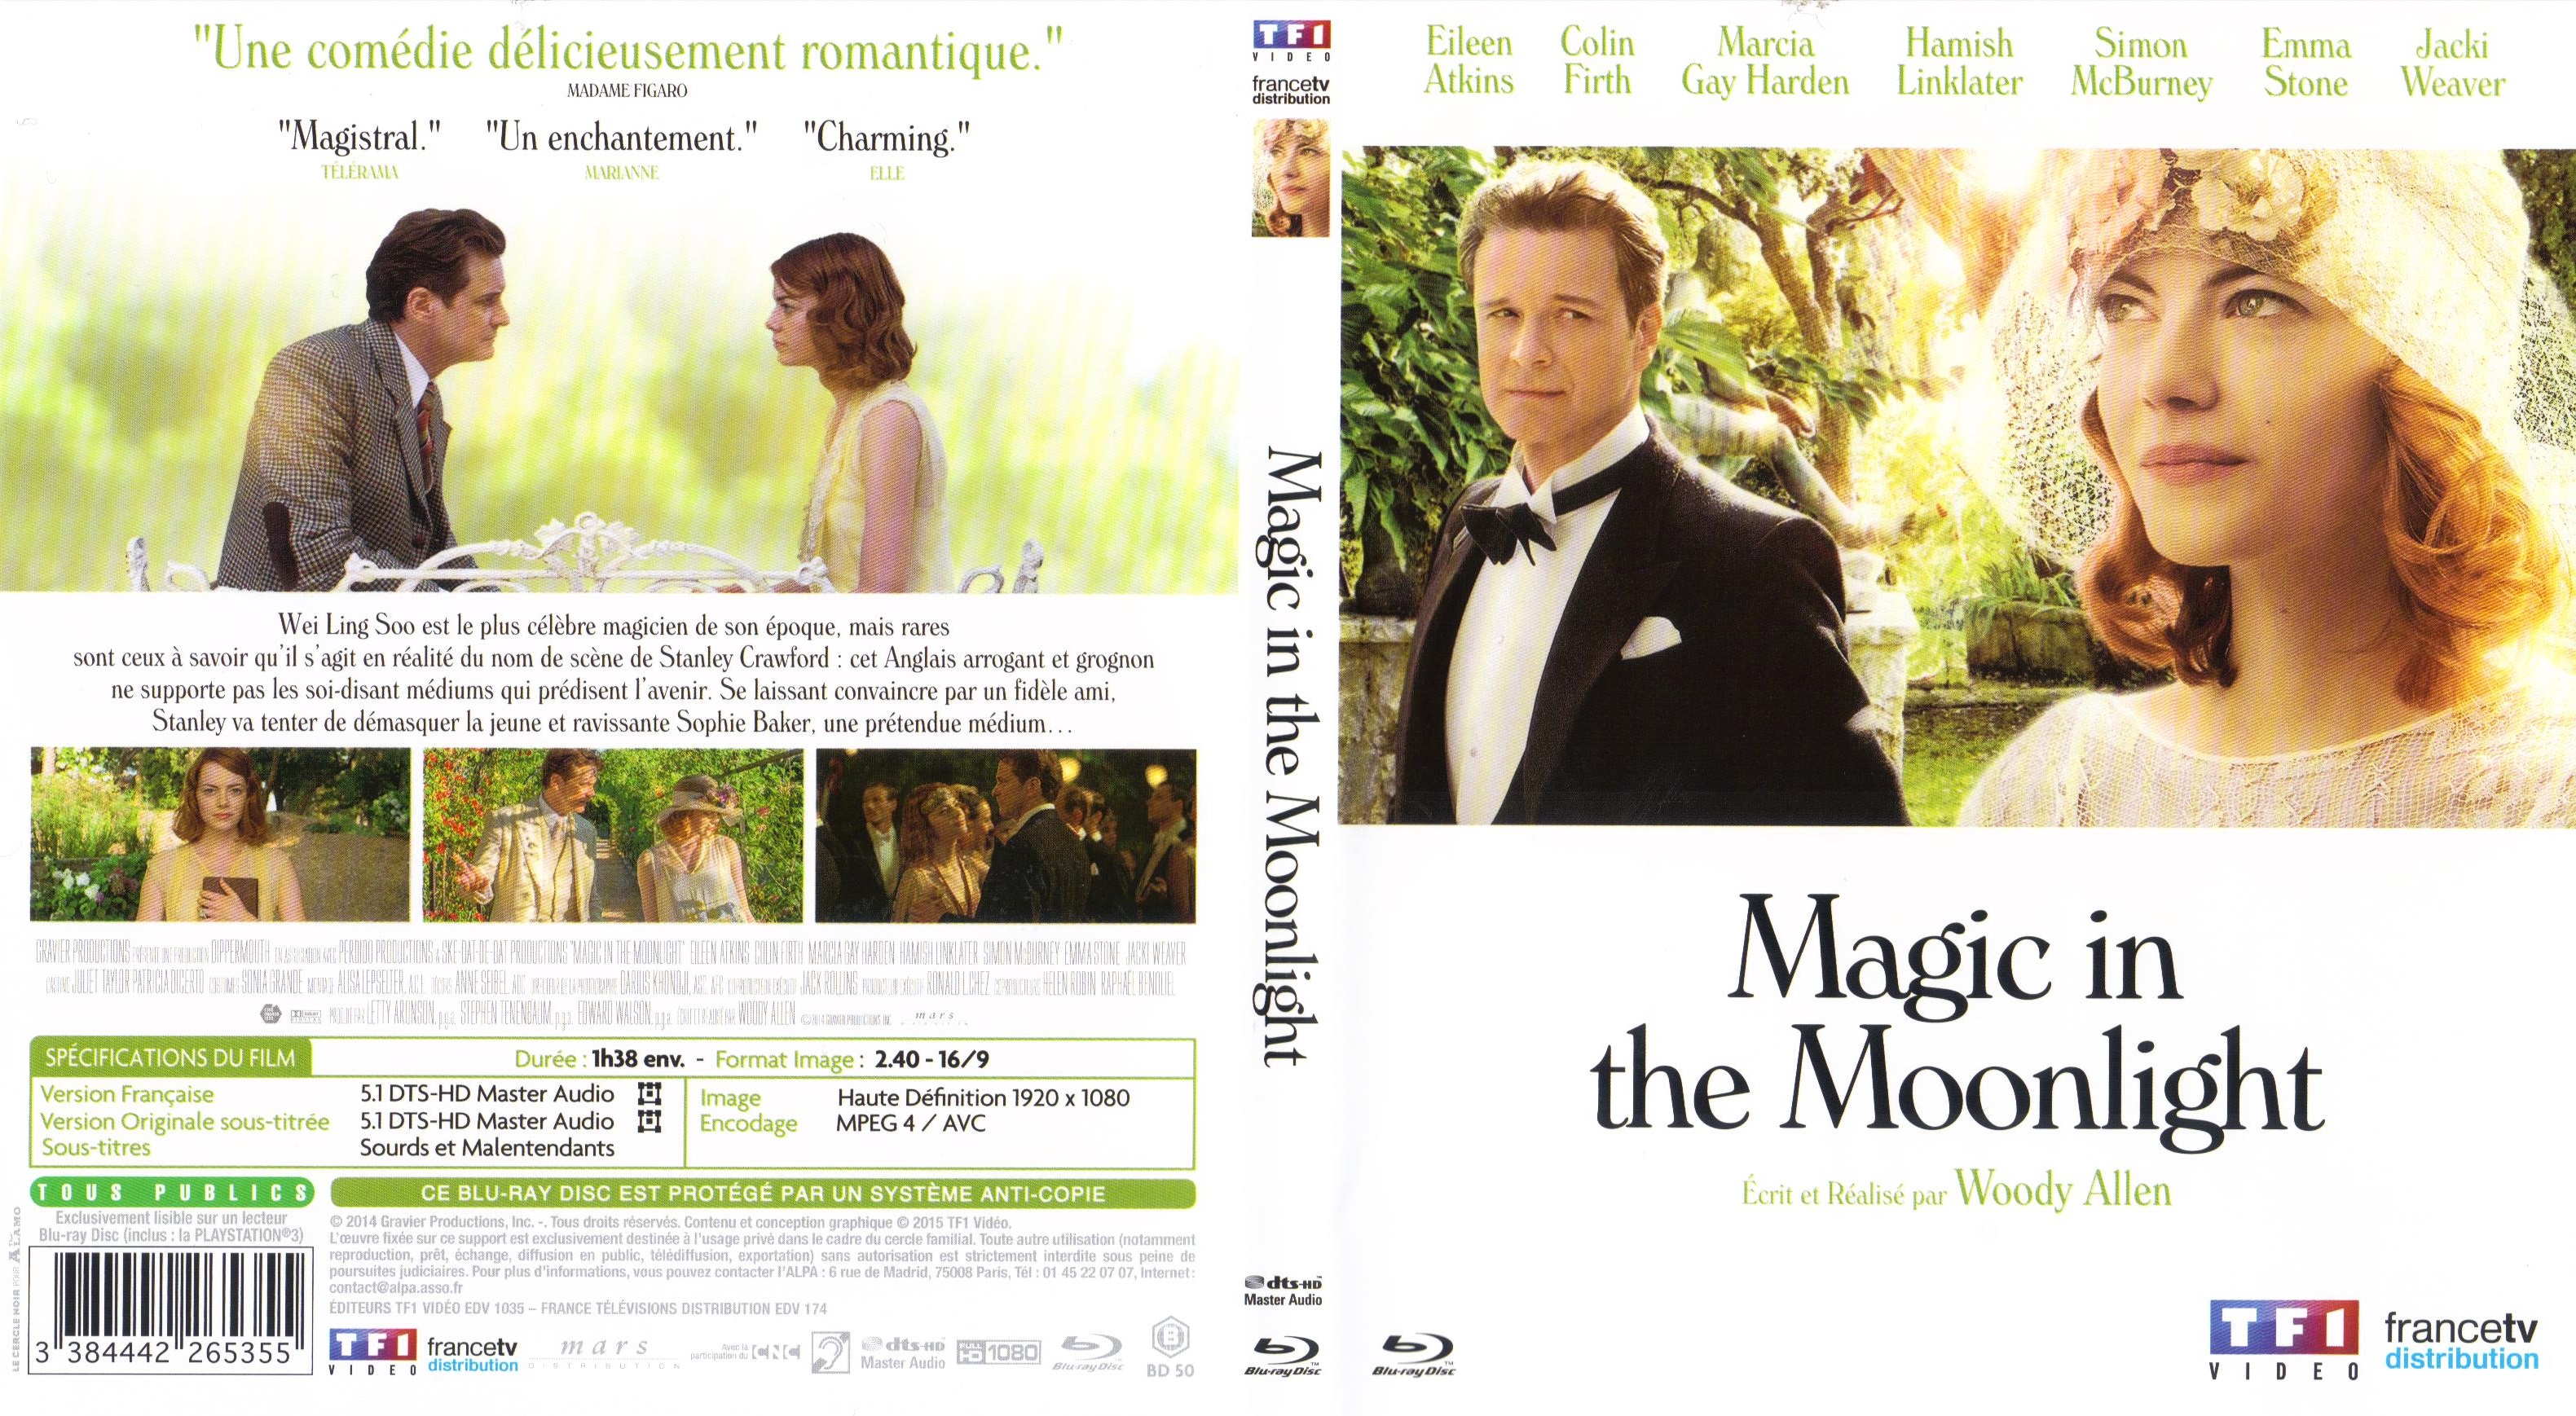 Jaquette DVD Magic in the Moonlight (BLU-RAY)